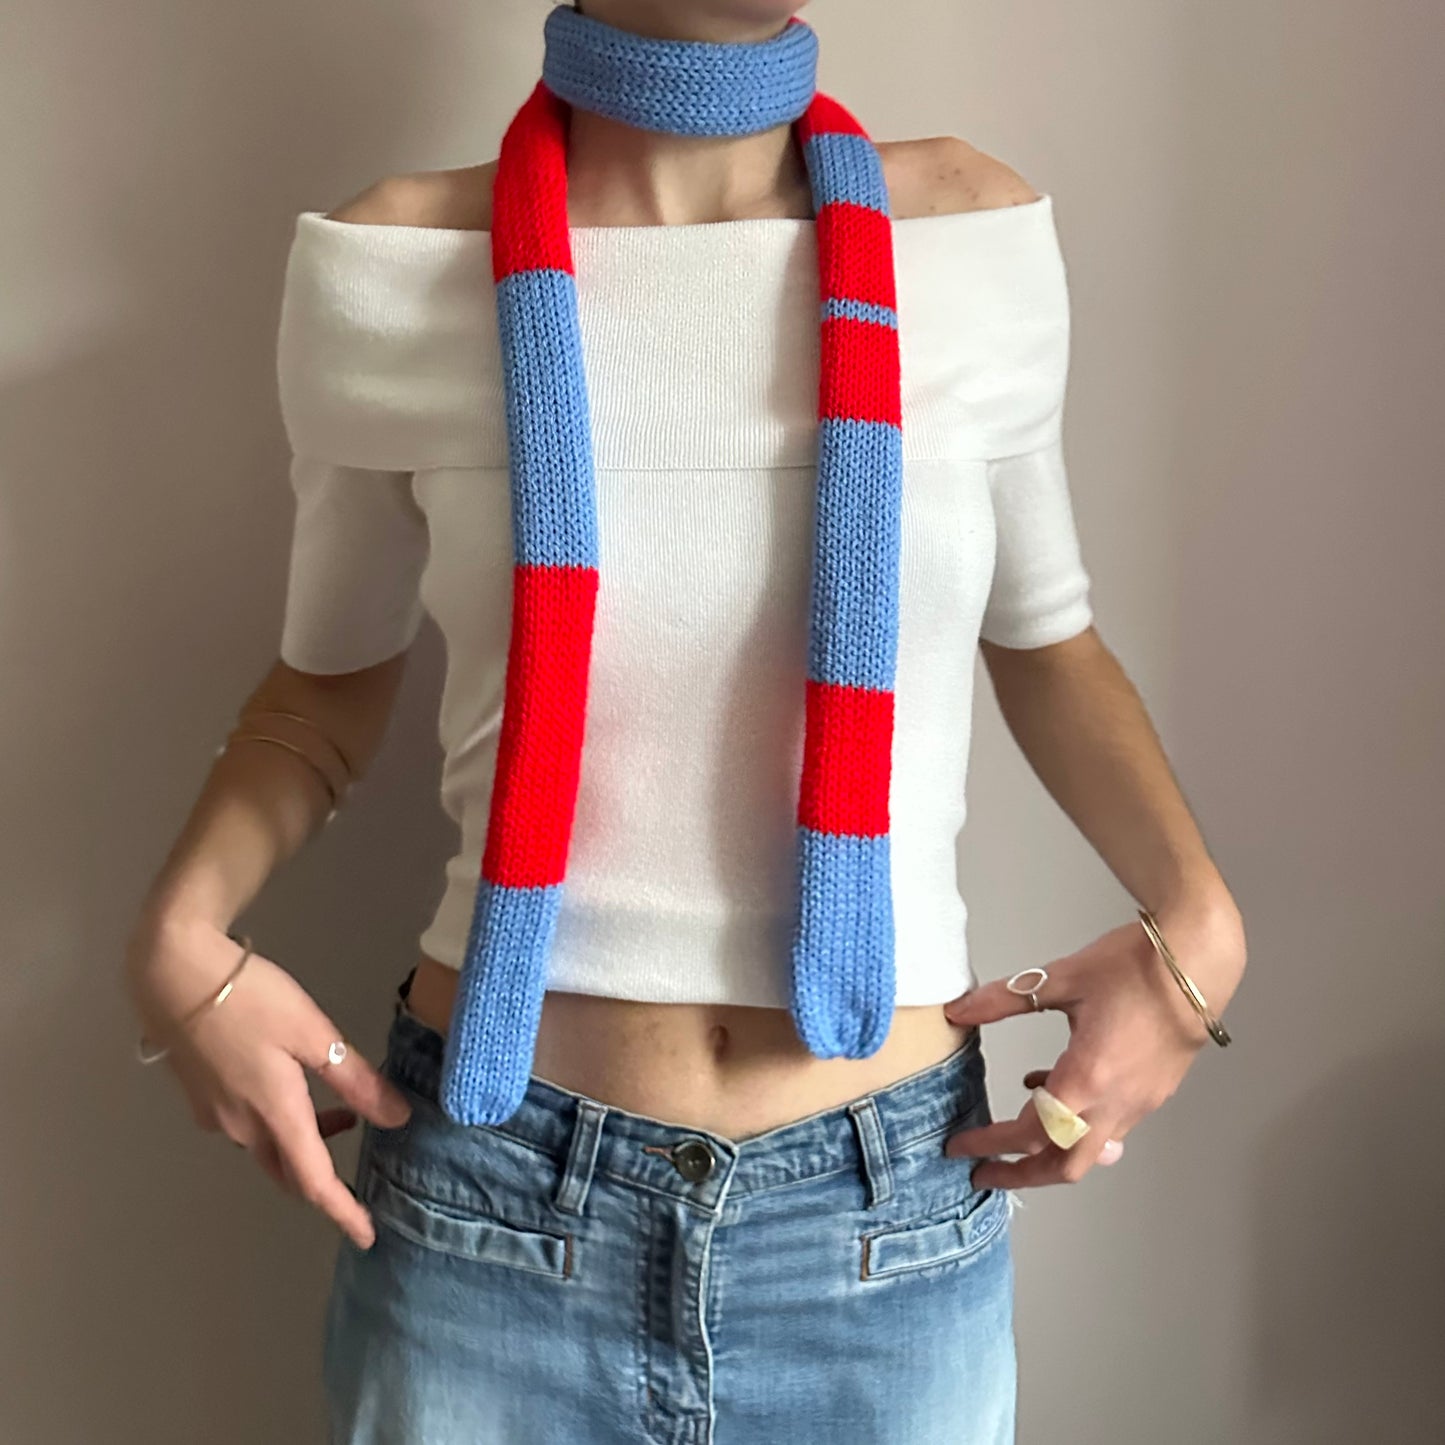 Handmade knitted stripy skinny scarf in red and blue